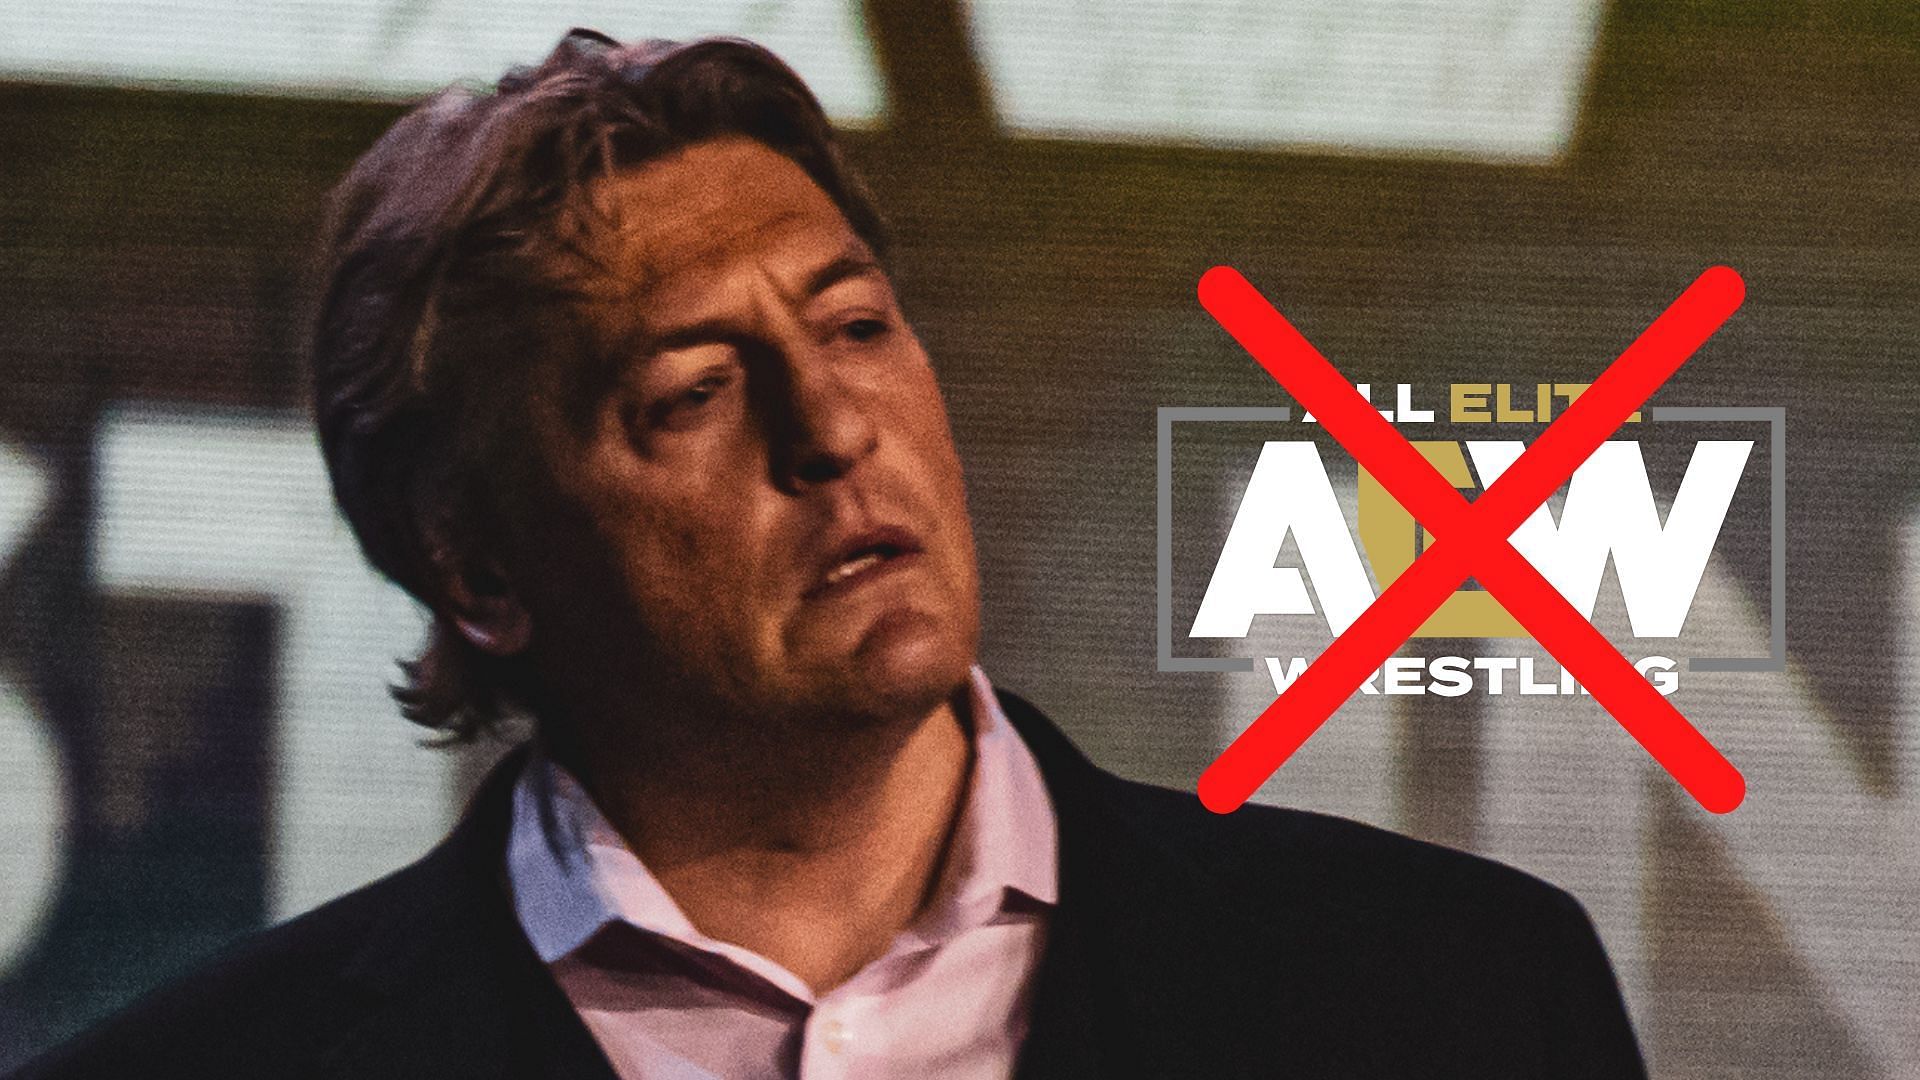 What plans did AEW have for William Regal?